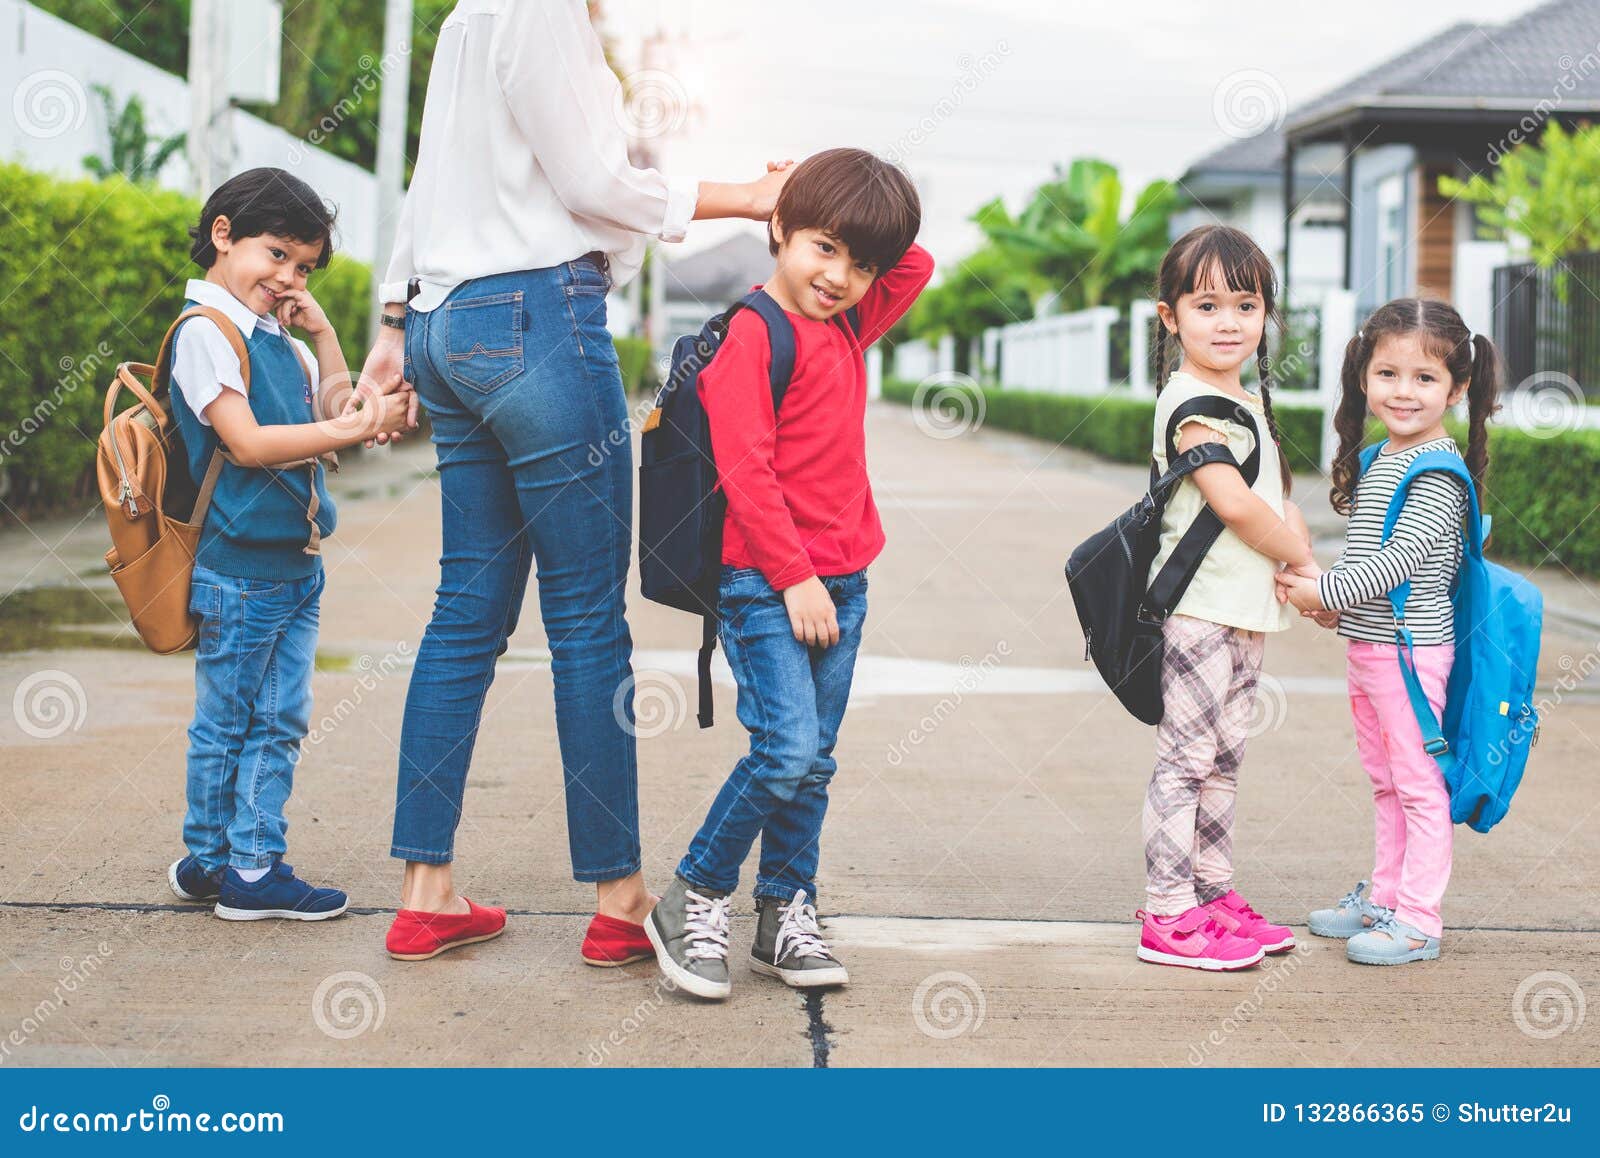 https://thumbs.dreamstime.com/z/back-to-school-students-mother-group-going-together-pare-parent-send-little-boy-girl-first-class-semester-term-132866365.jpg